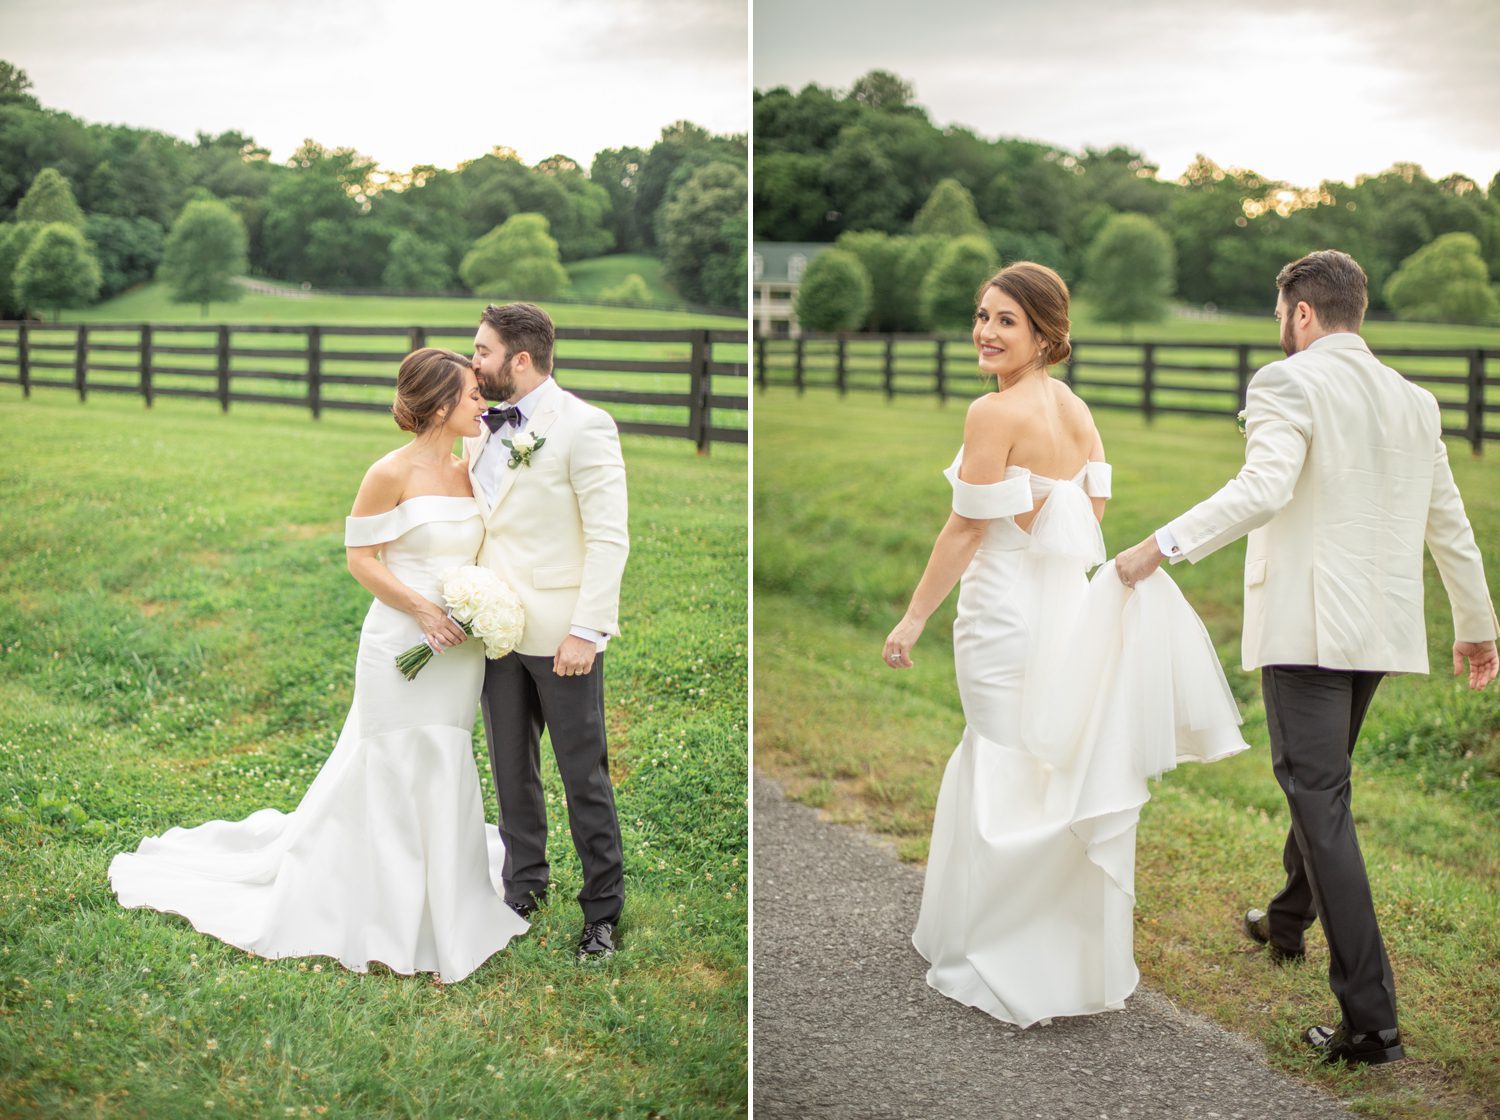 Private Estate Wedding Franklin, TN Bride and Groom Portrait in Green Field with Fence